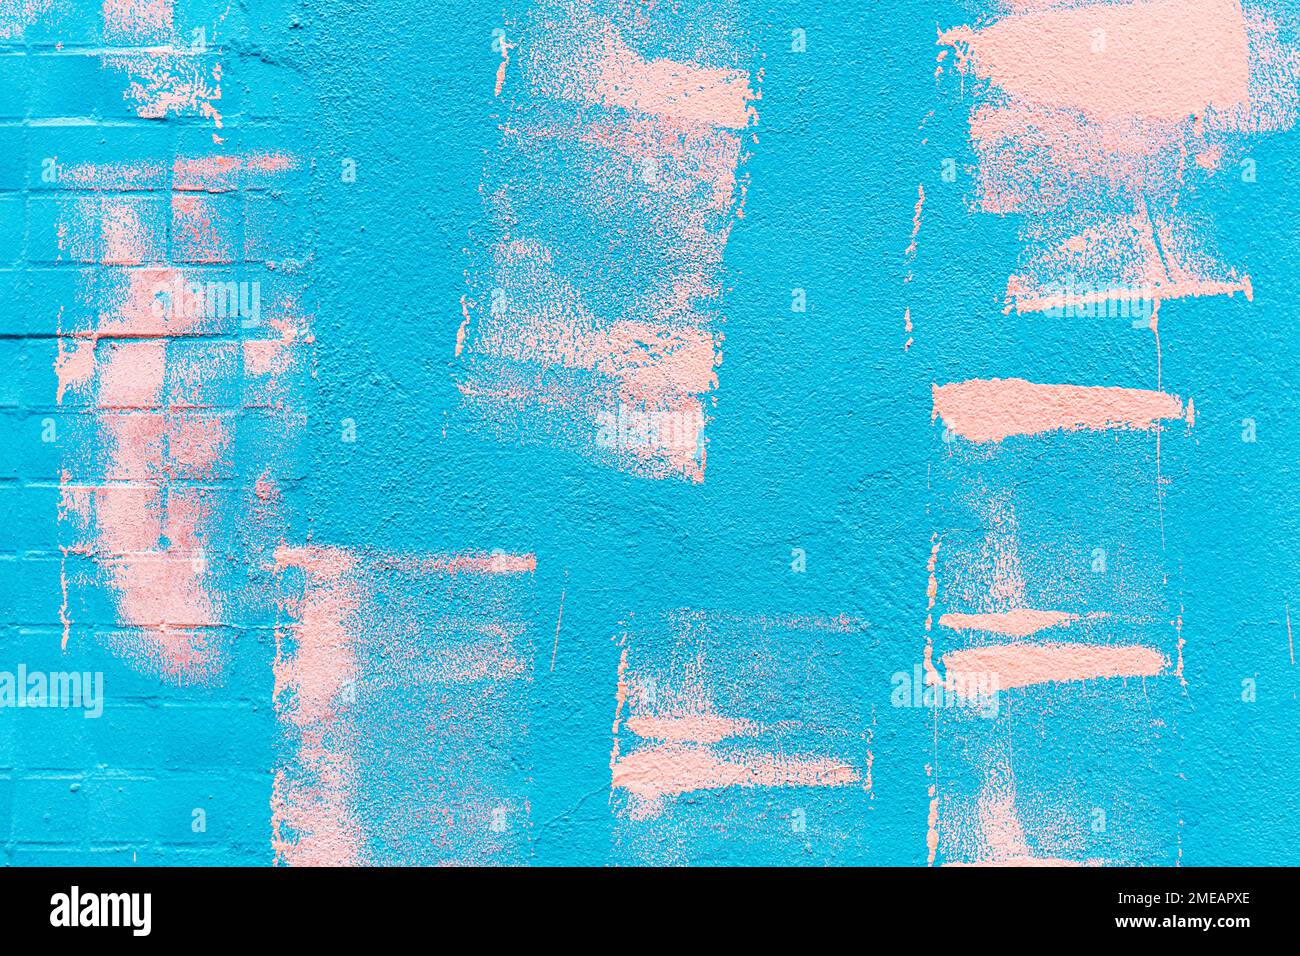 pink paint roller strokes on painted blue stucco wall Stock Photo